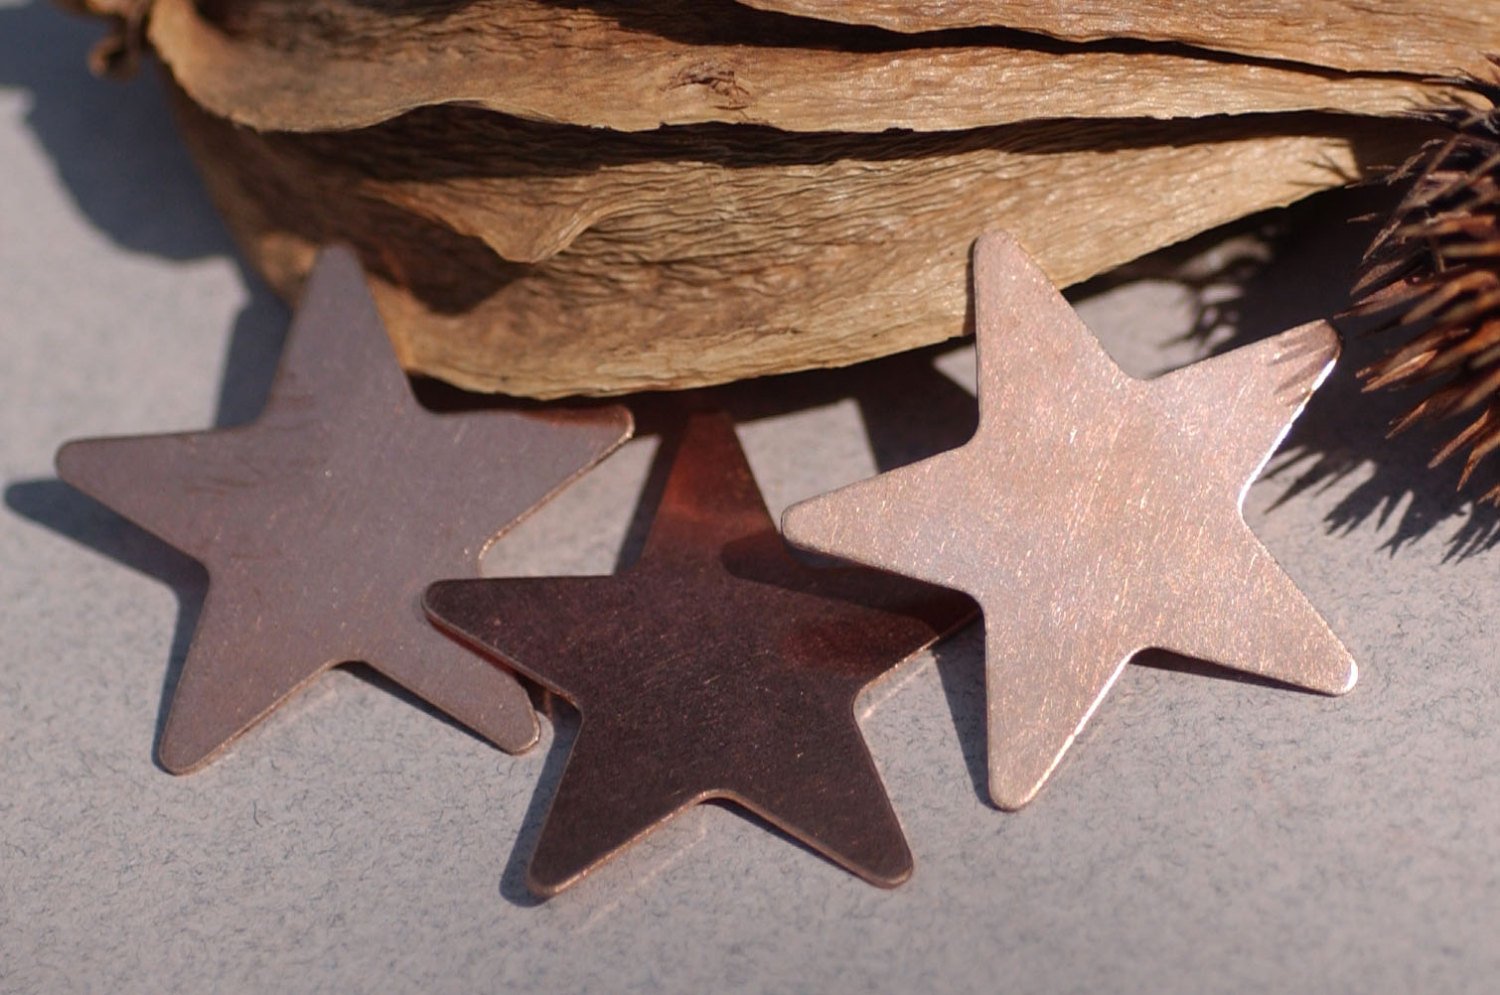 Copper or Nickel Silver Star 30mm 24g Cutout Blanks for Enameling Metalworking Soldering Stamping Texturing Blank - 5 pieces